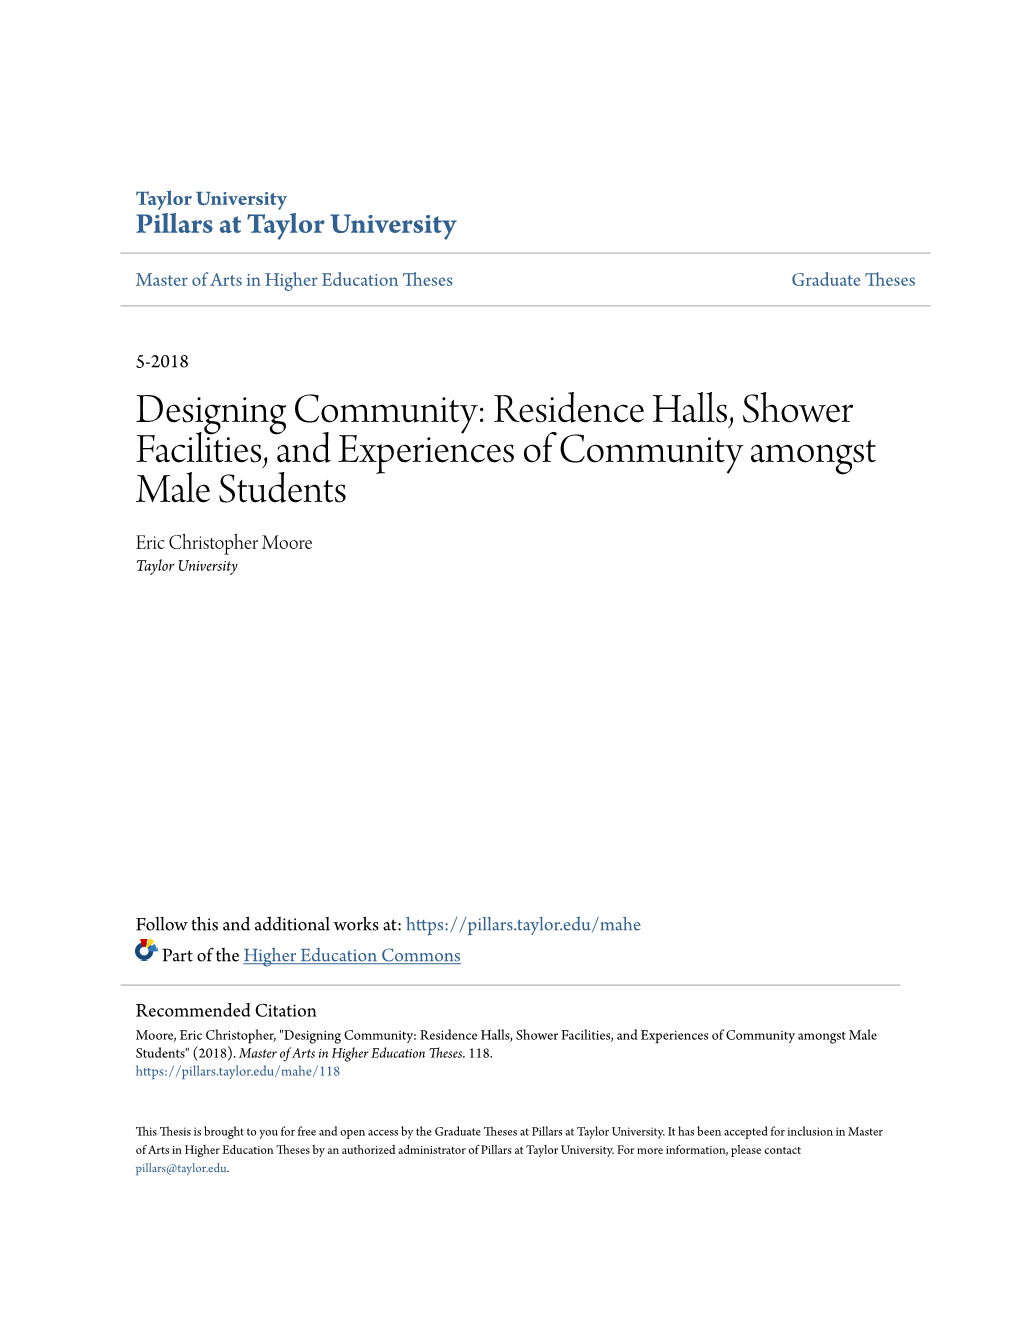 Residence Halls, Shower Facilities, and Experiences of Community Amongst Male Students Eric Christopher Moore Taylor University